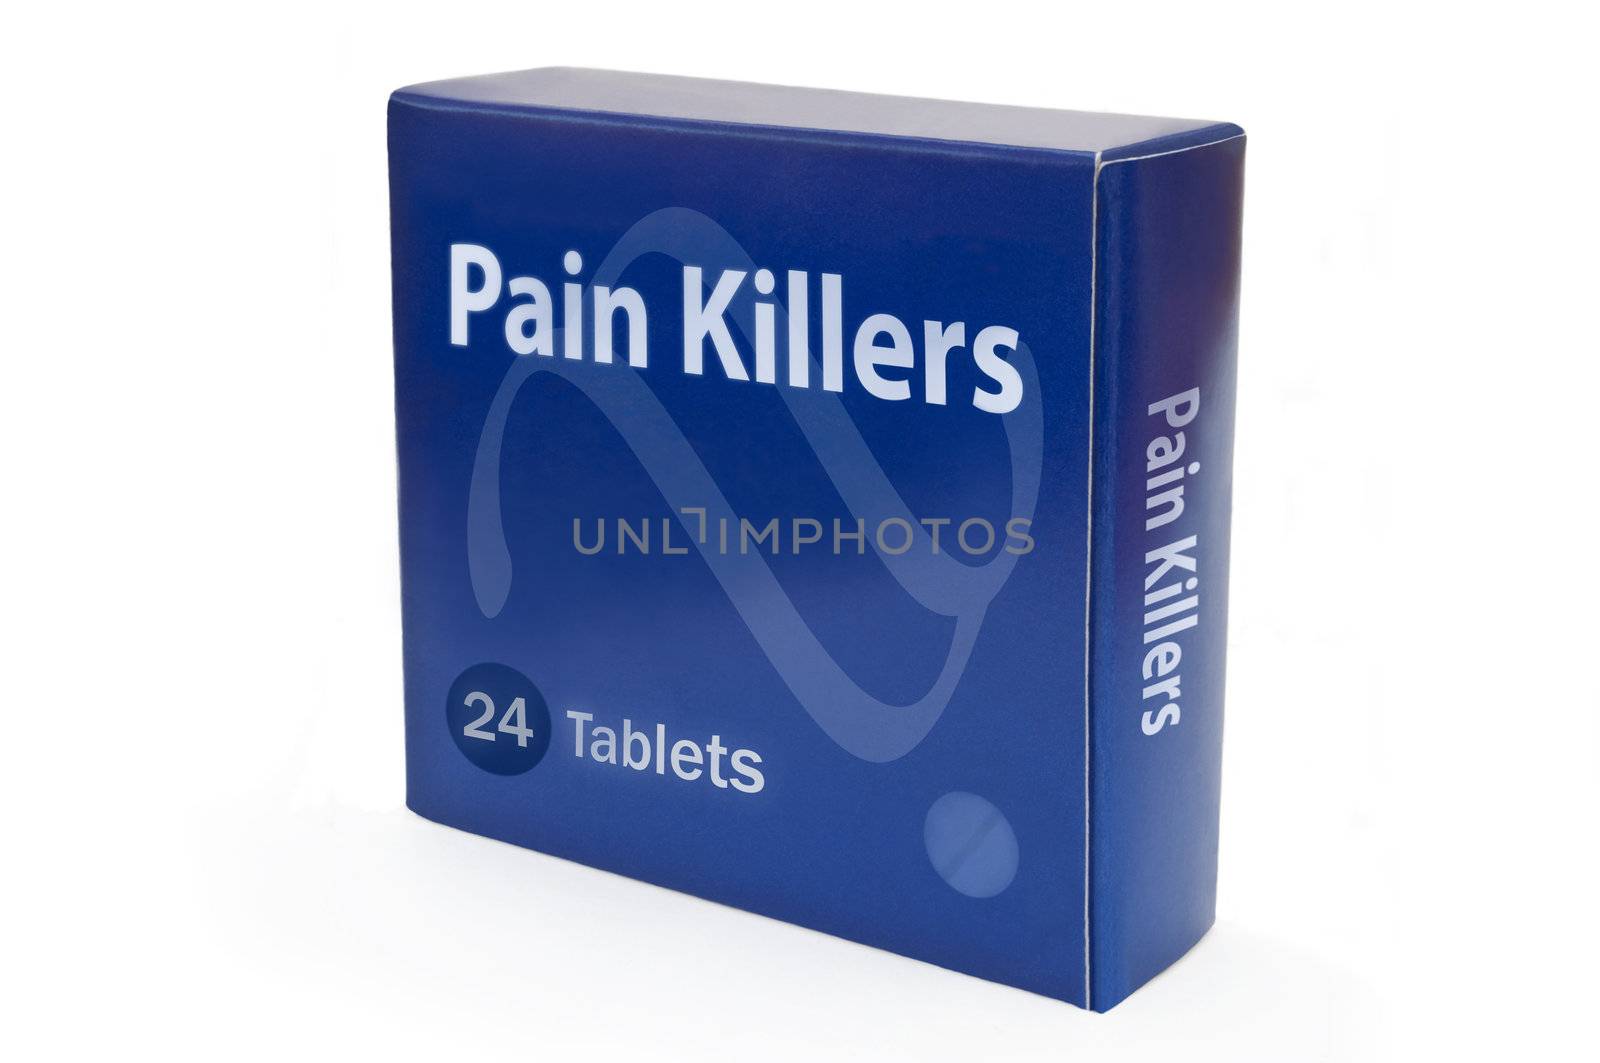 Pain Killers by 72soul